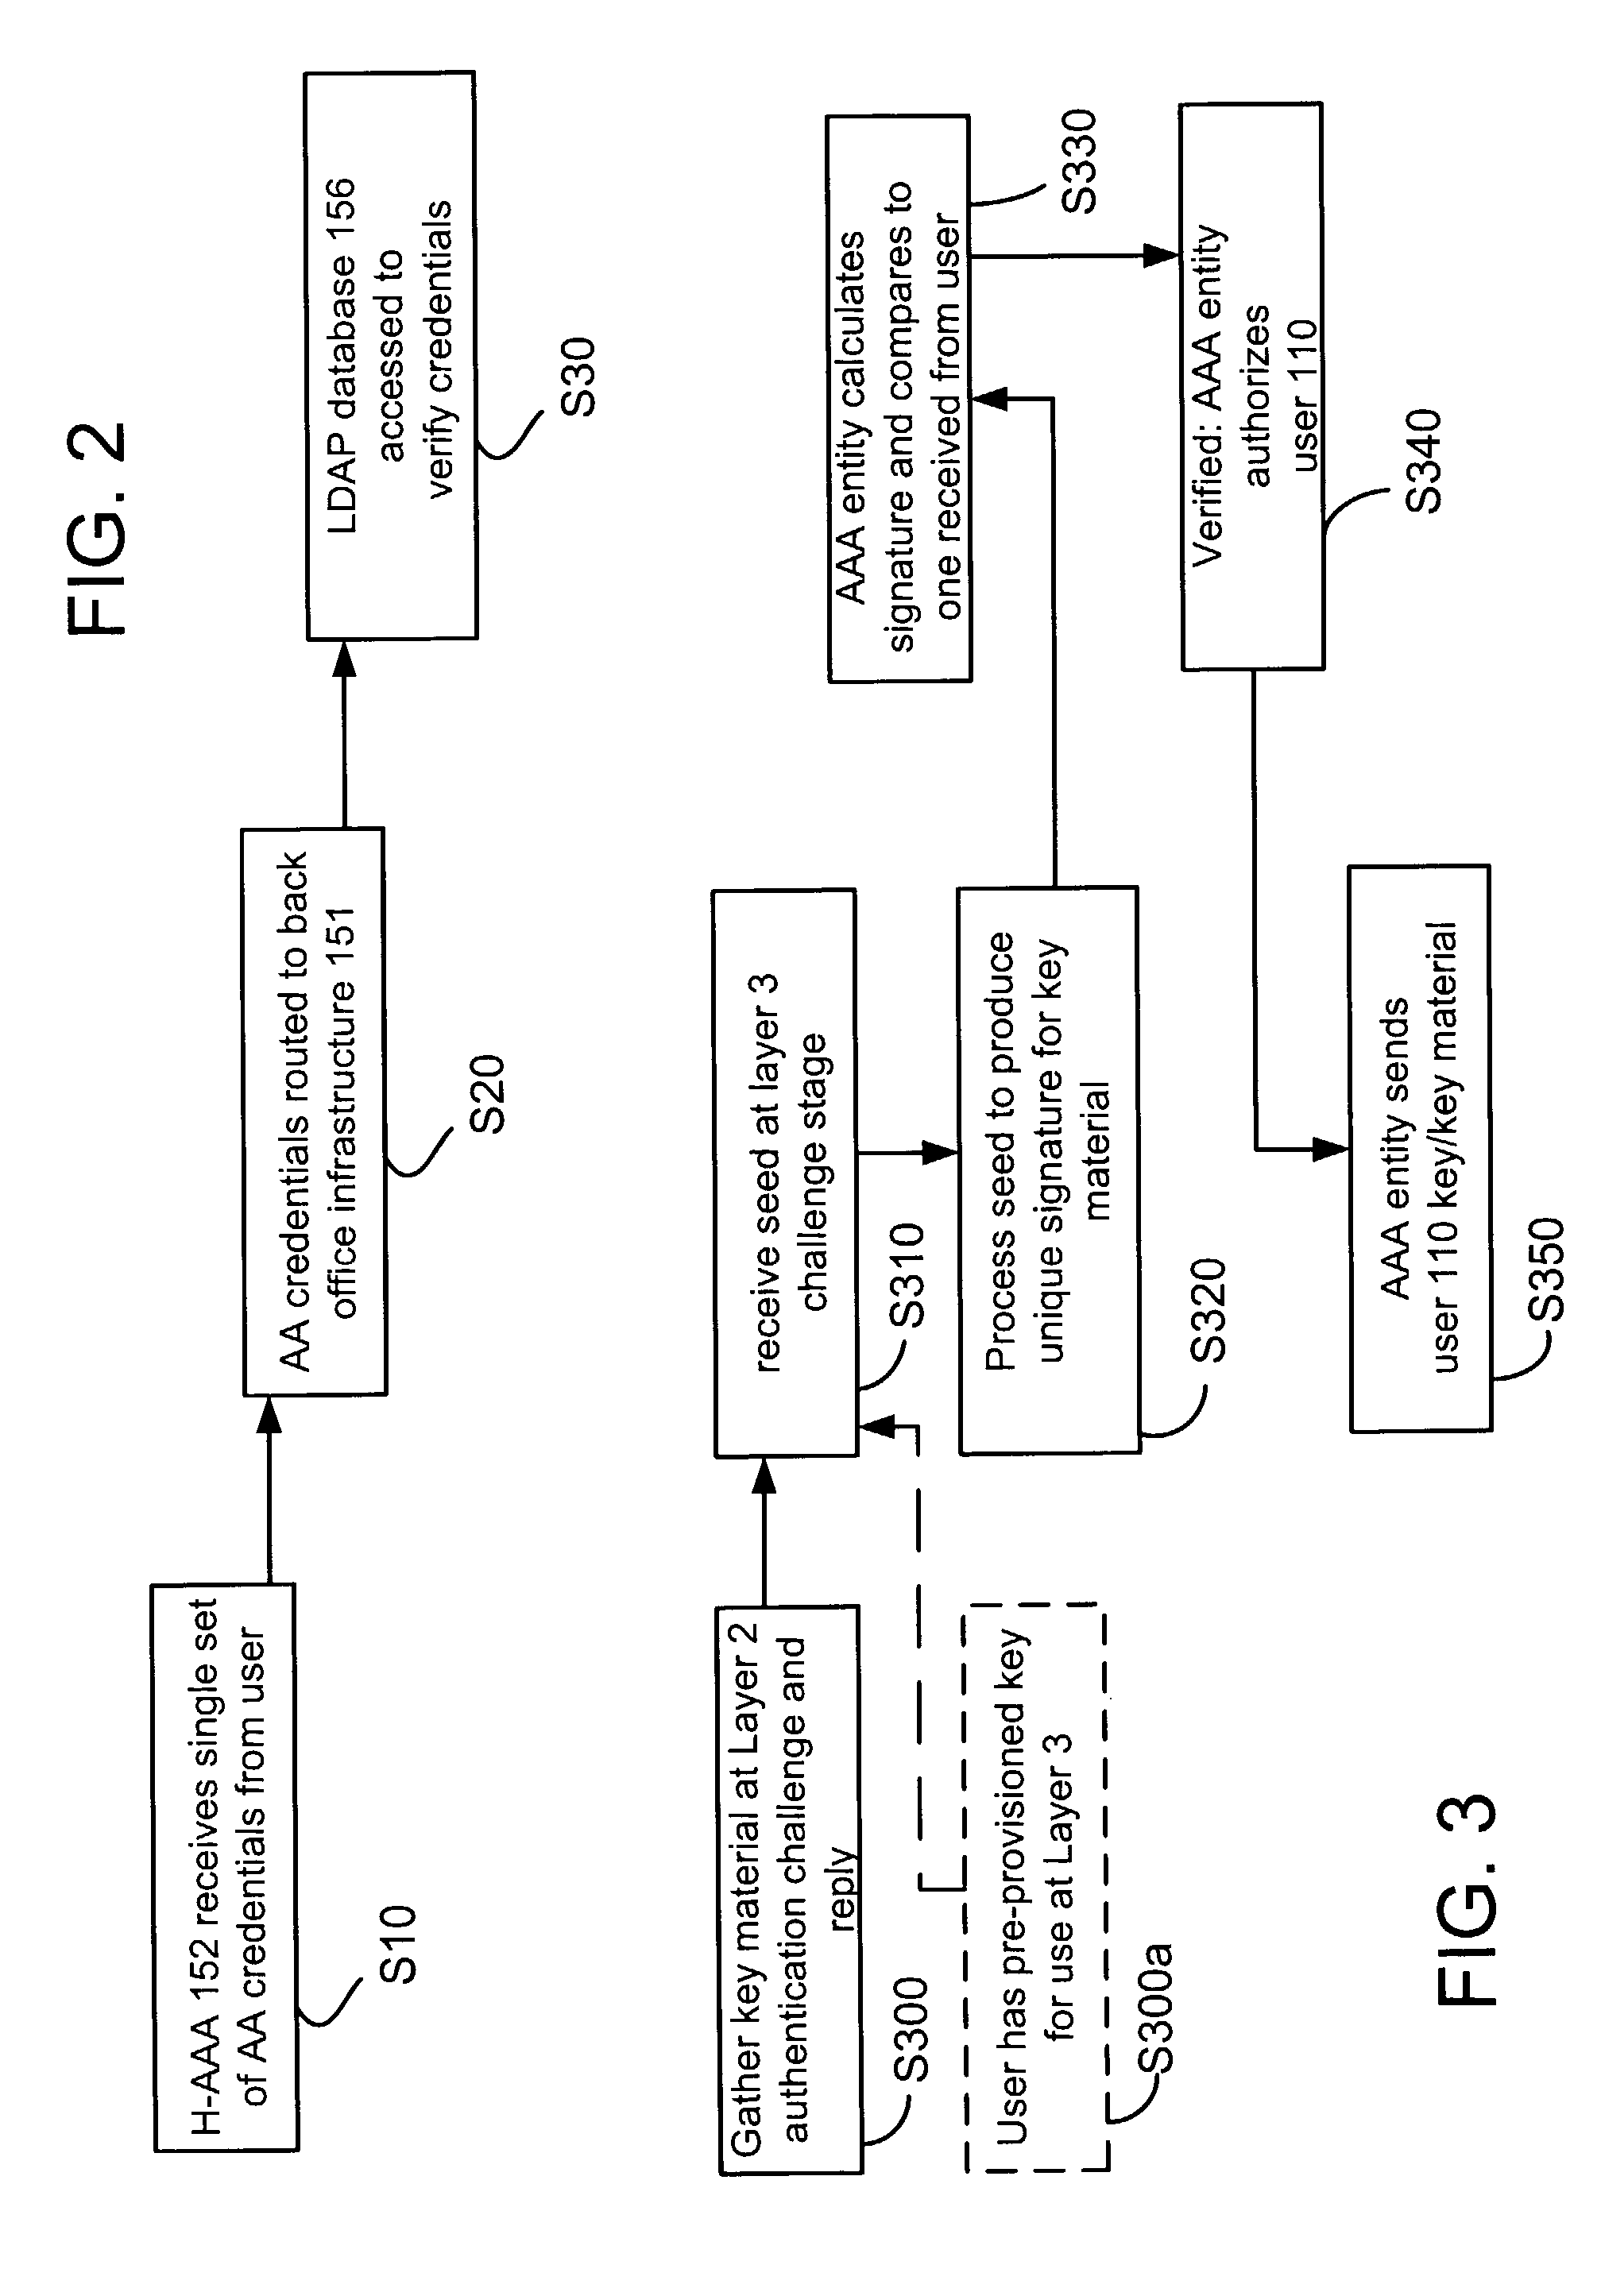 Methods for common authentication and authorization across independent networks